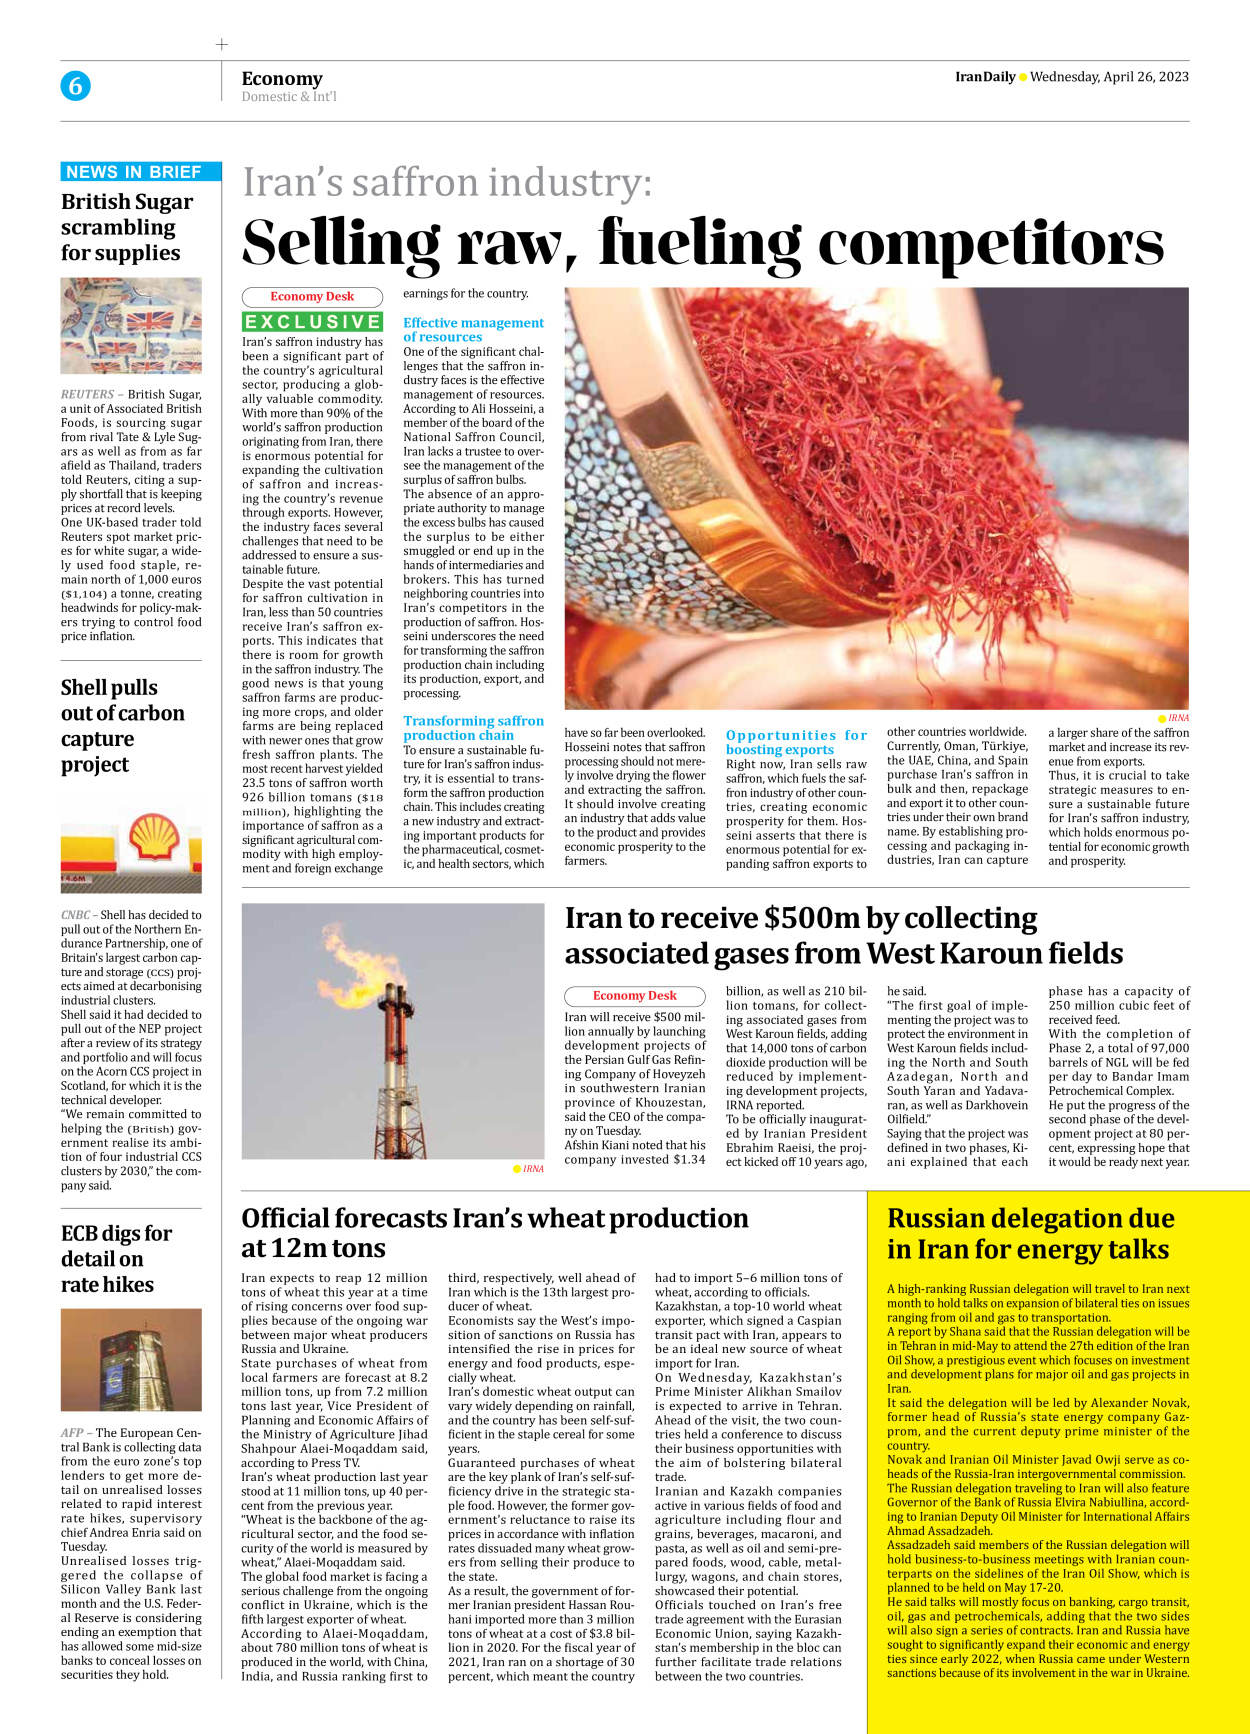 Iran Daily - Number Seven Thousand Two Hundred and Seventy Six - 26 April 2023 - Page 6